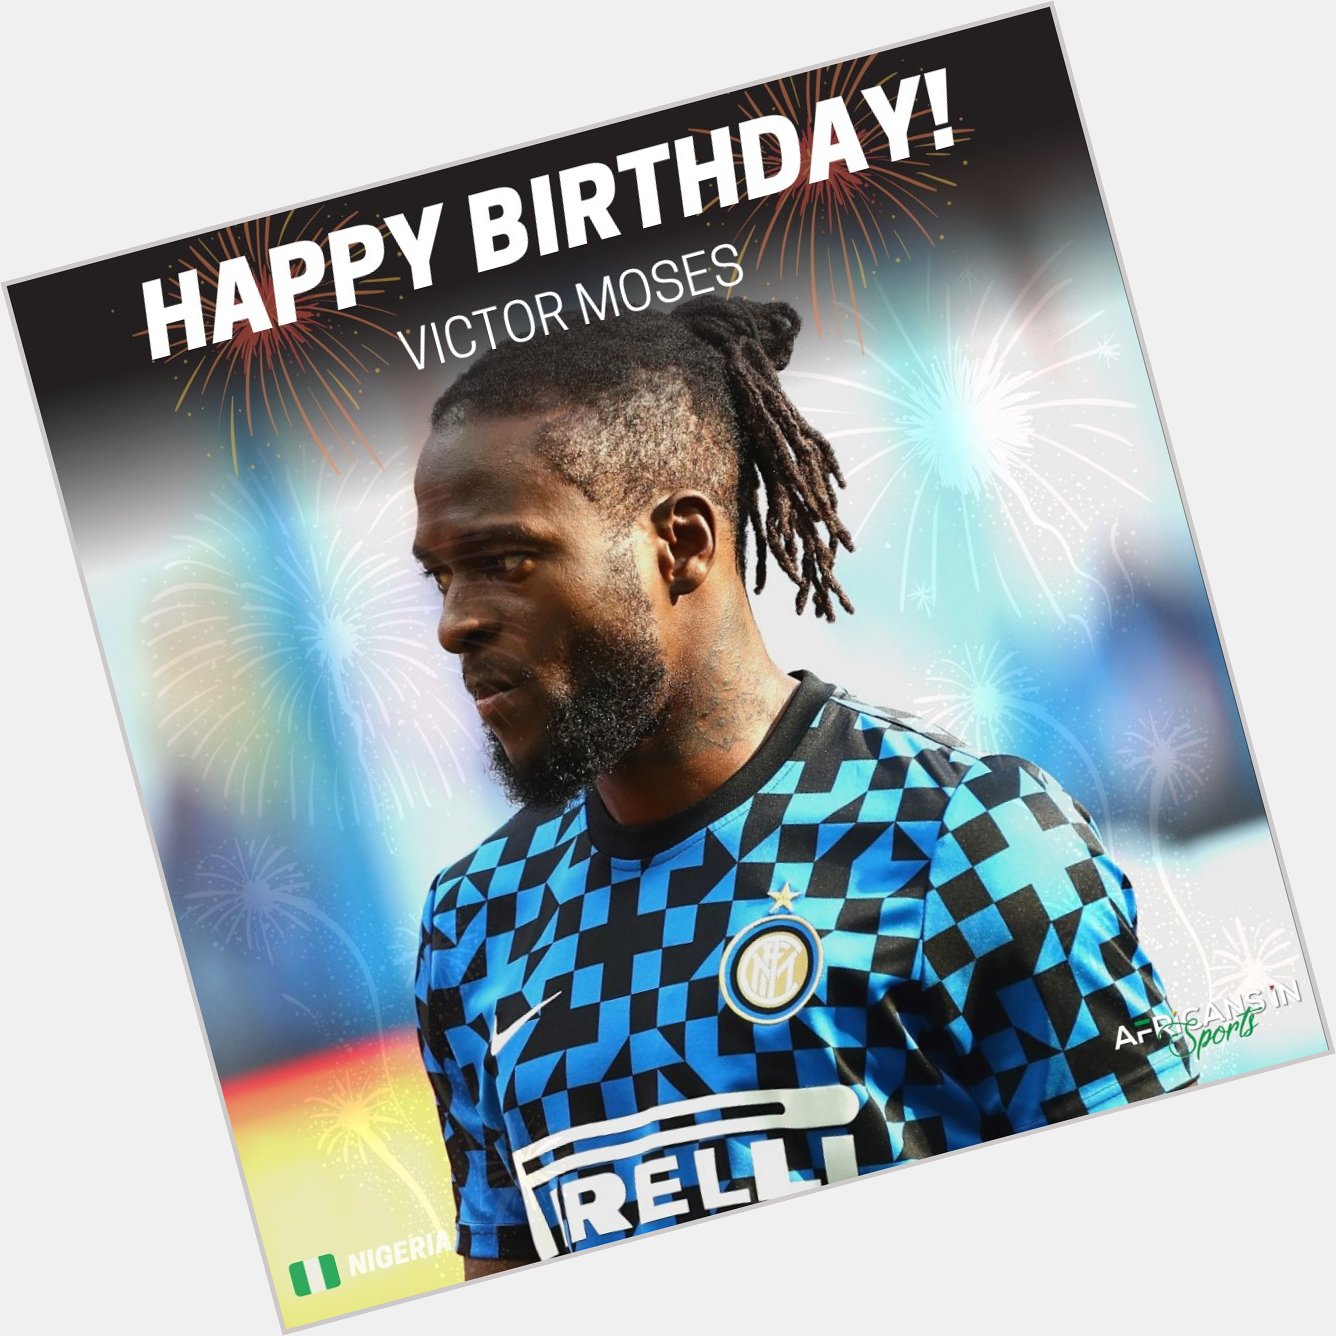 Happy birthday to Nigerian Professional Footballer, Victor Moses  -
Send him some love via the comment section 